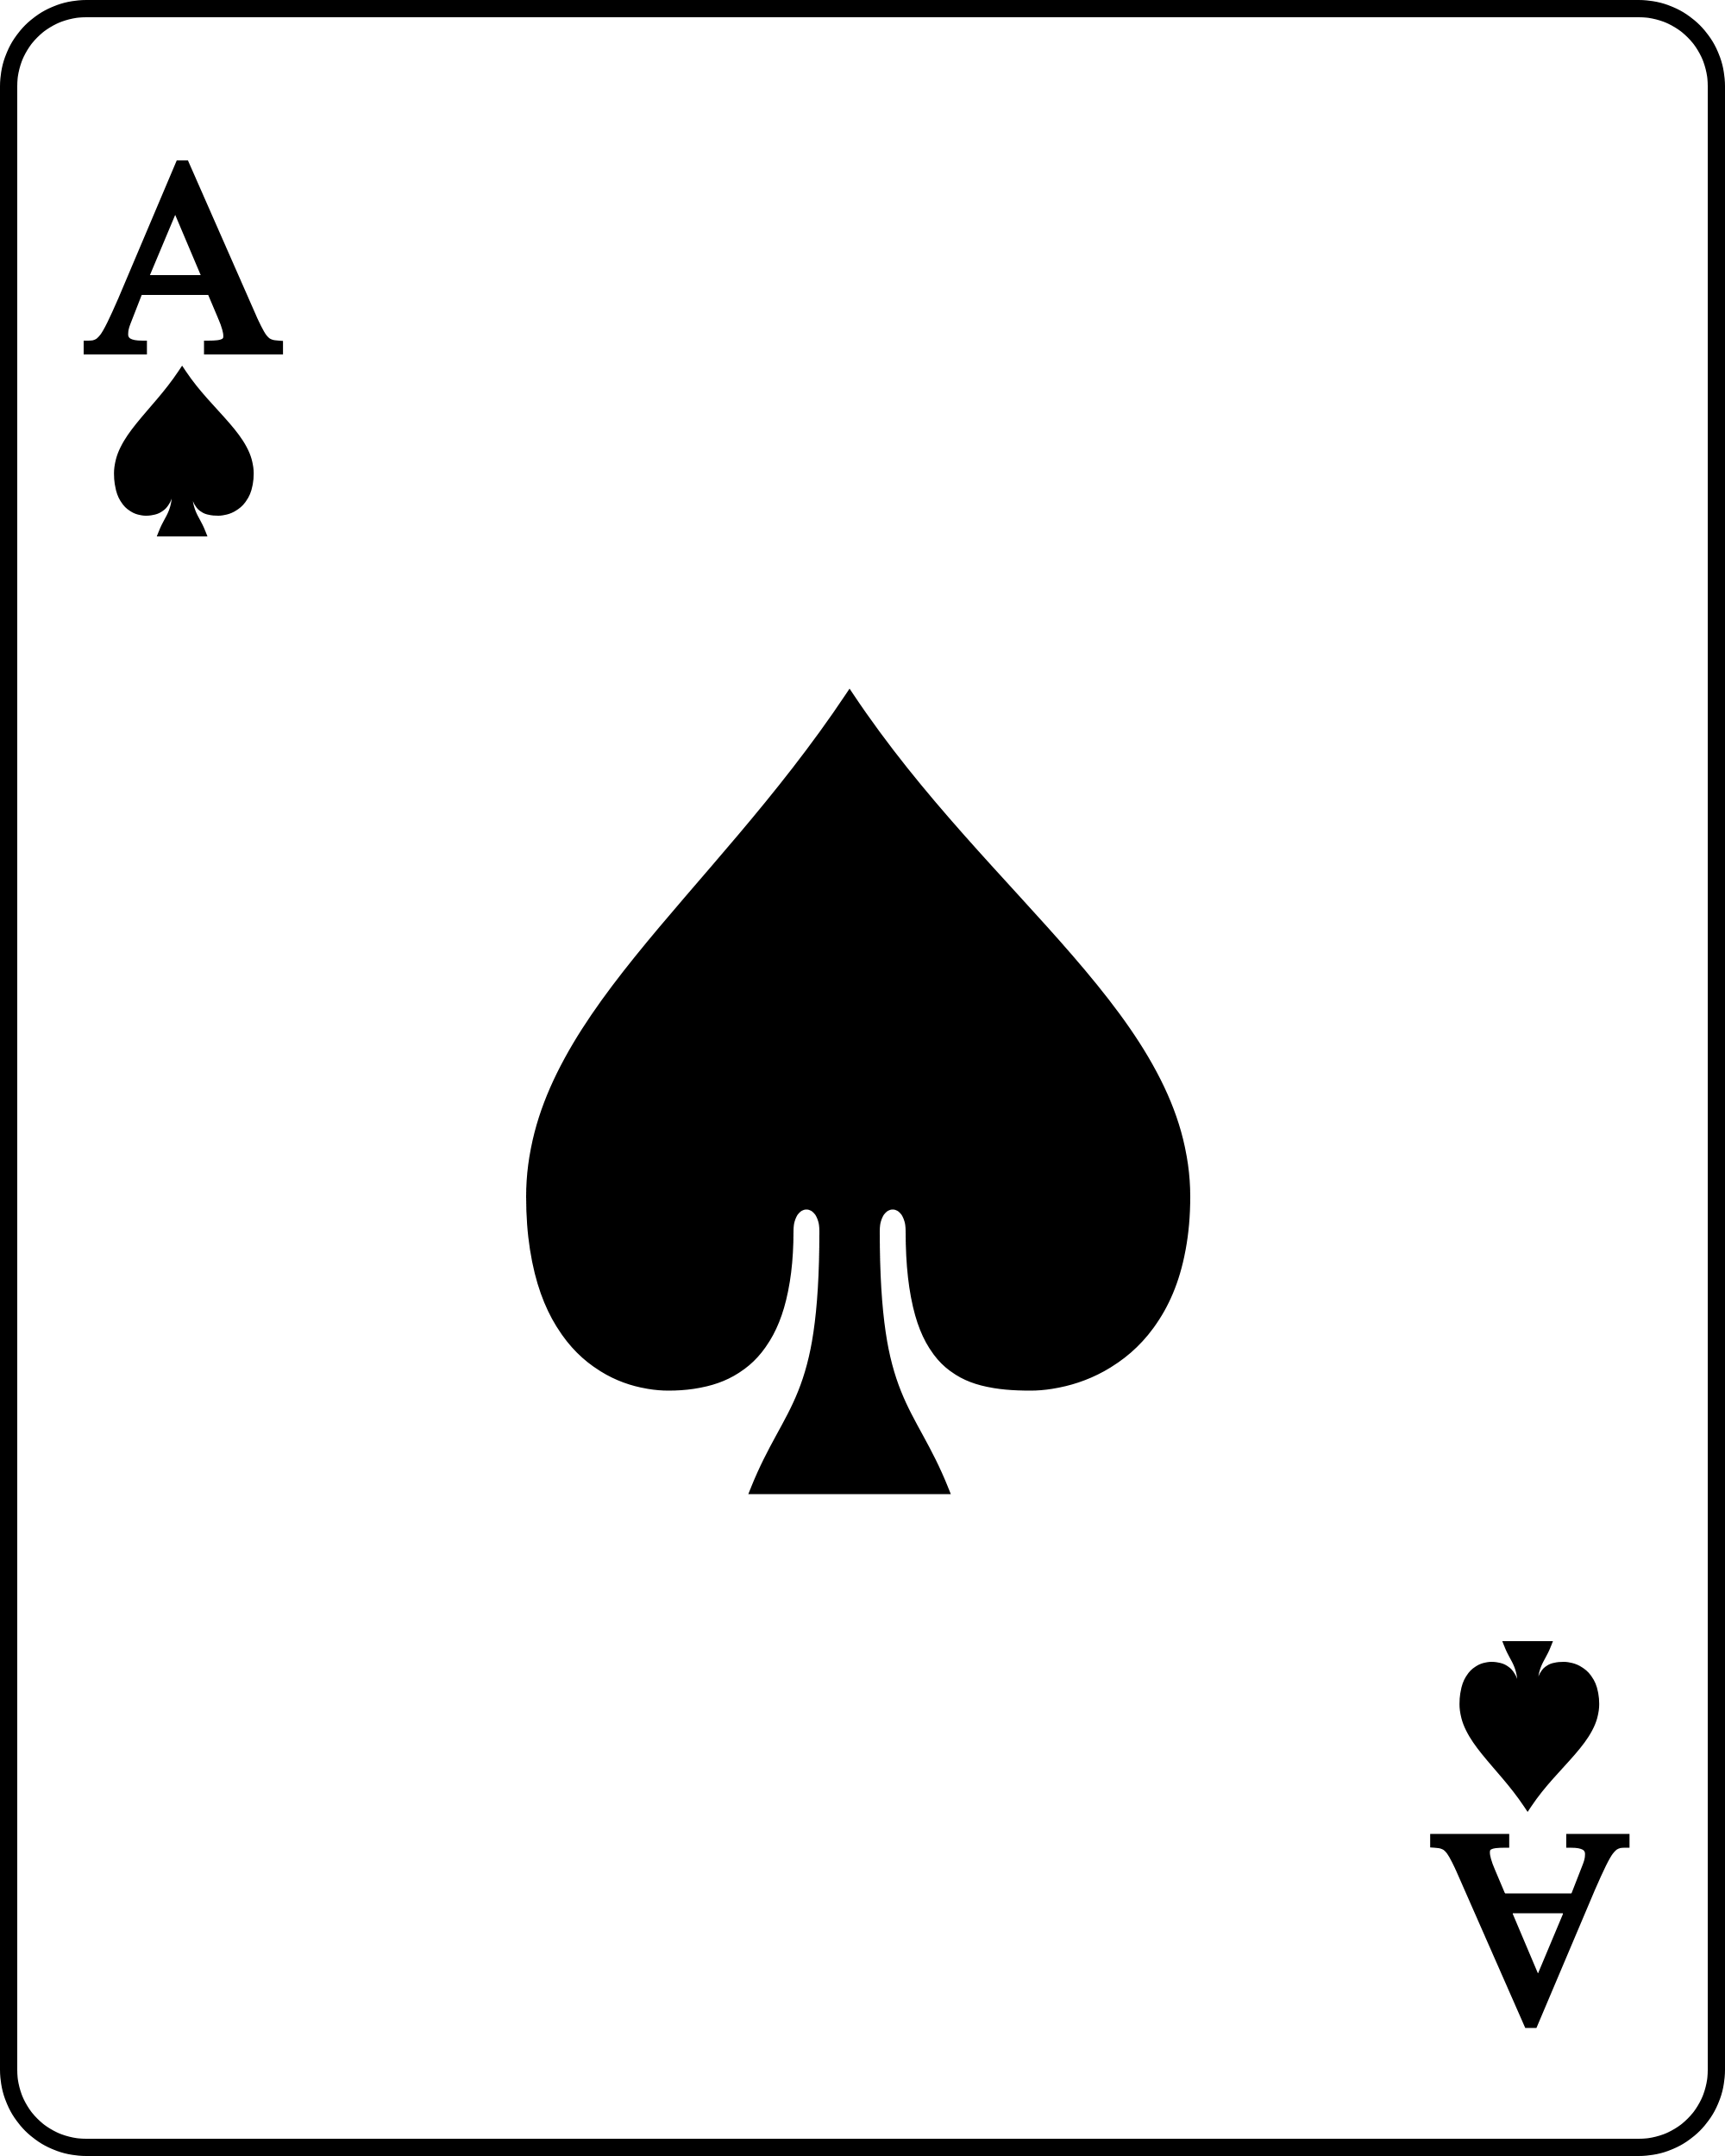 File:Playing card spade A.svg - Wikimedia Commons